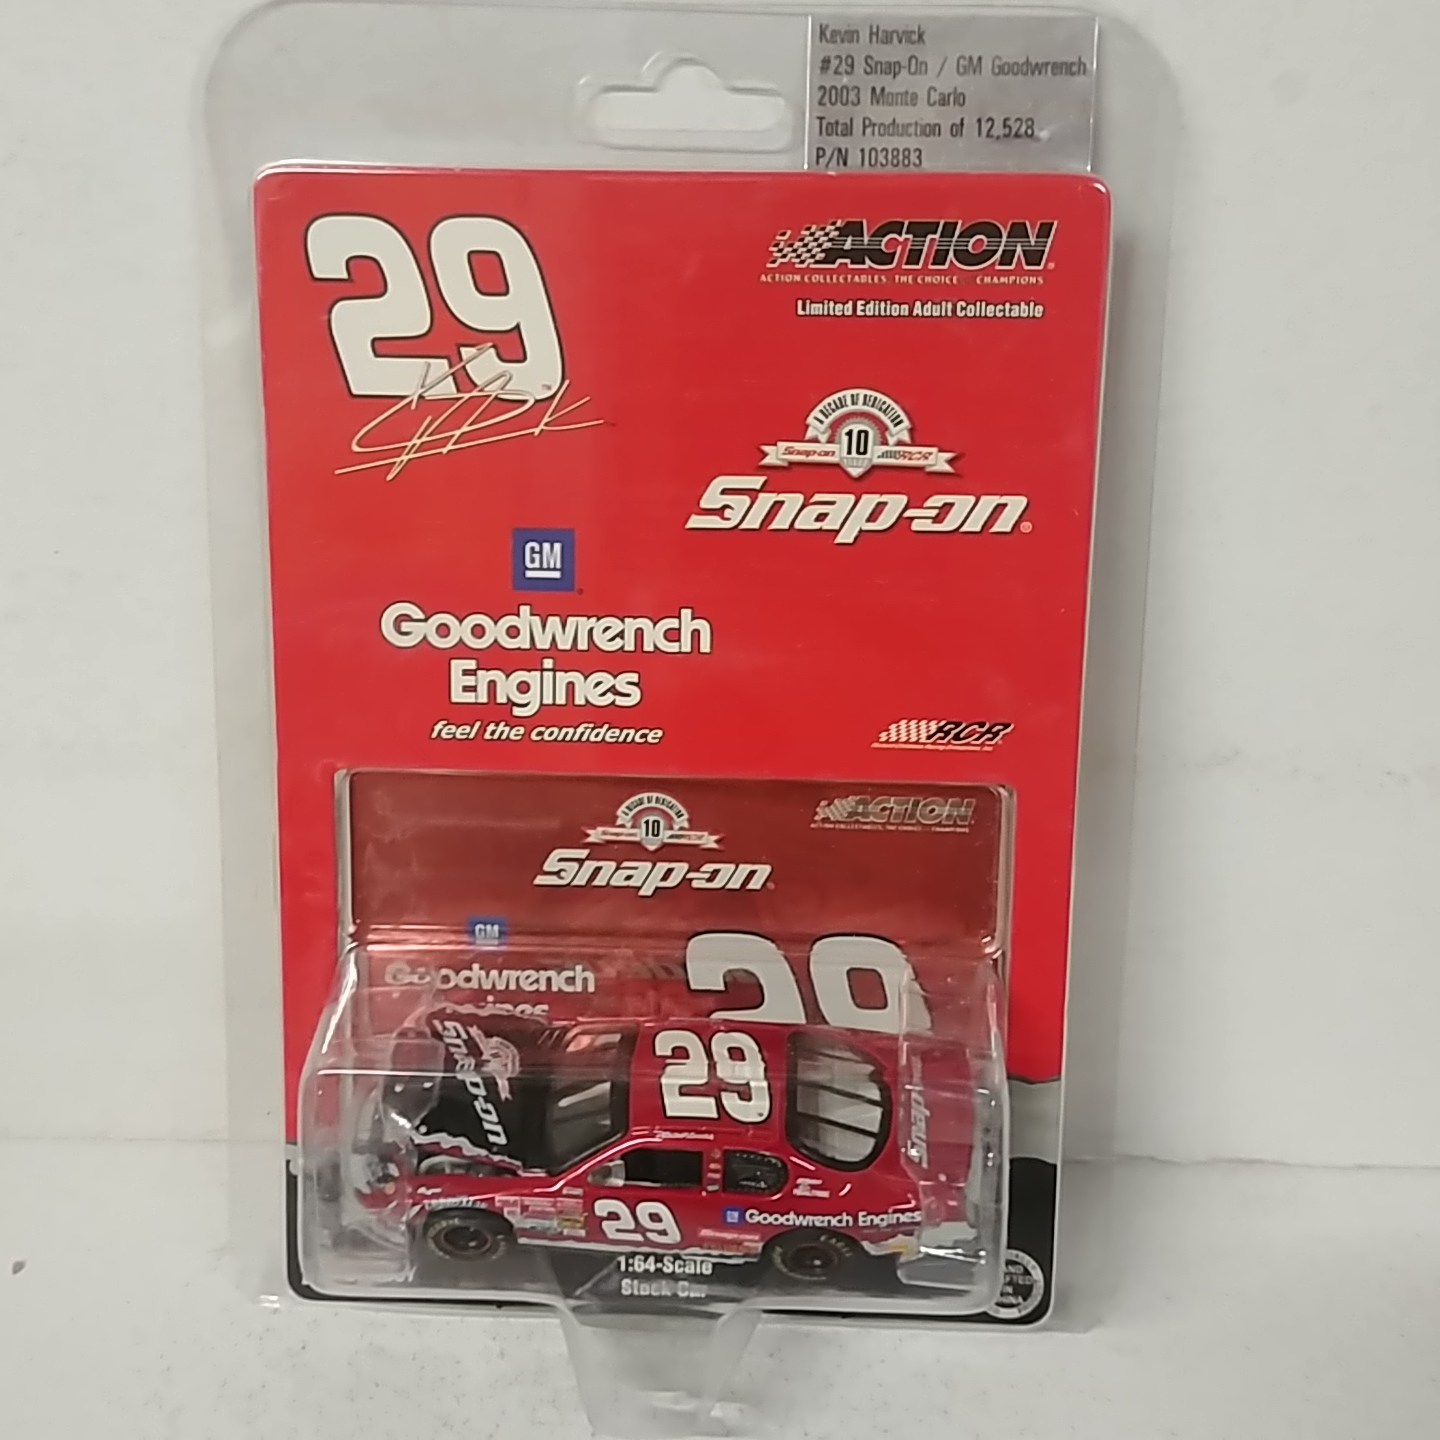 2003 Kevin Harvick 1/64th Goodwrench "Snap On" ARC hood open Monte Carlo